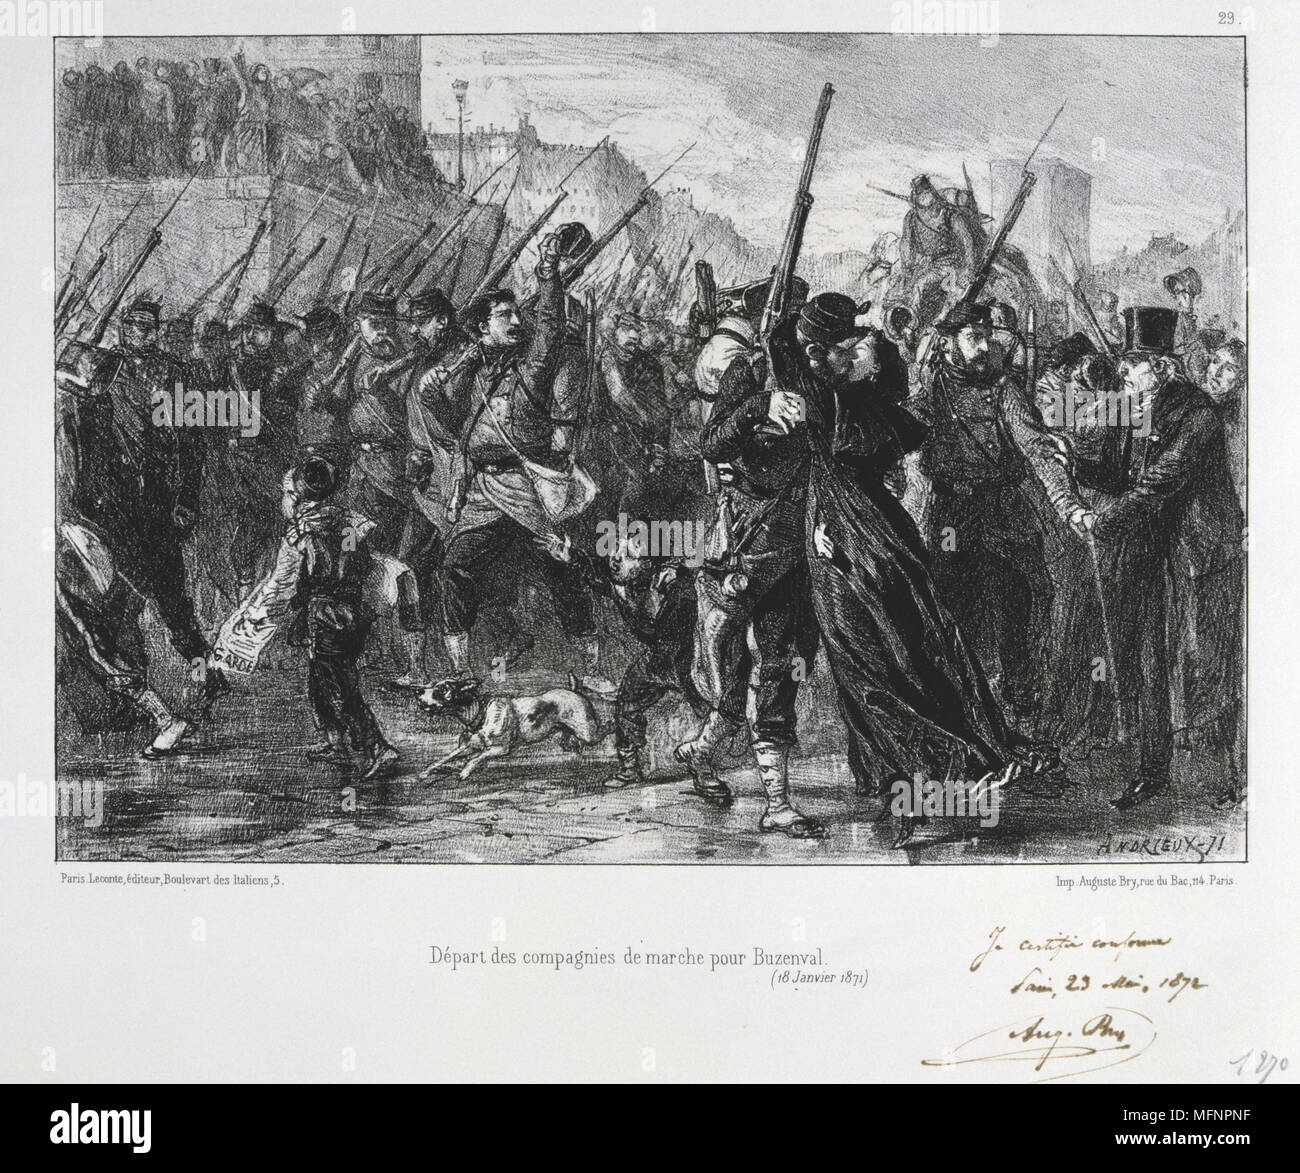 Franco-Prussian War 1870-1871: Battle of Buzenval (Mount Valerien) near Versailles 19 Jan 1871. Garde National marching to the battle and defeat. From a series of lithographs  by Clement August Andrieux on the Gardes Nationales. Stock Photo